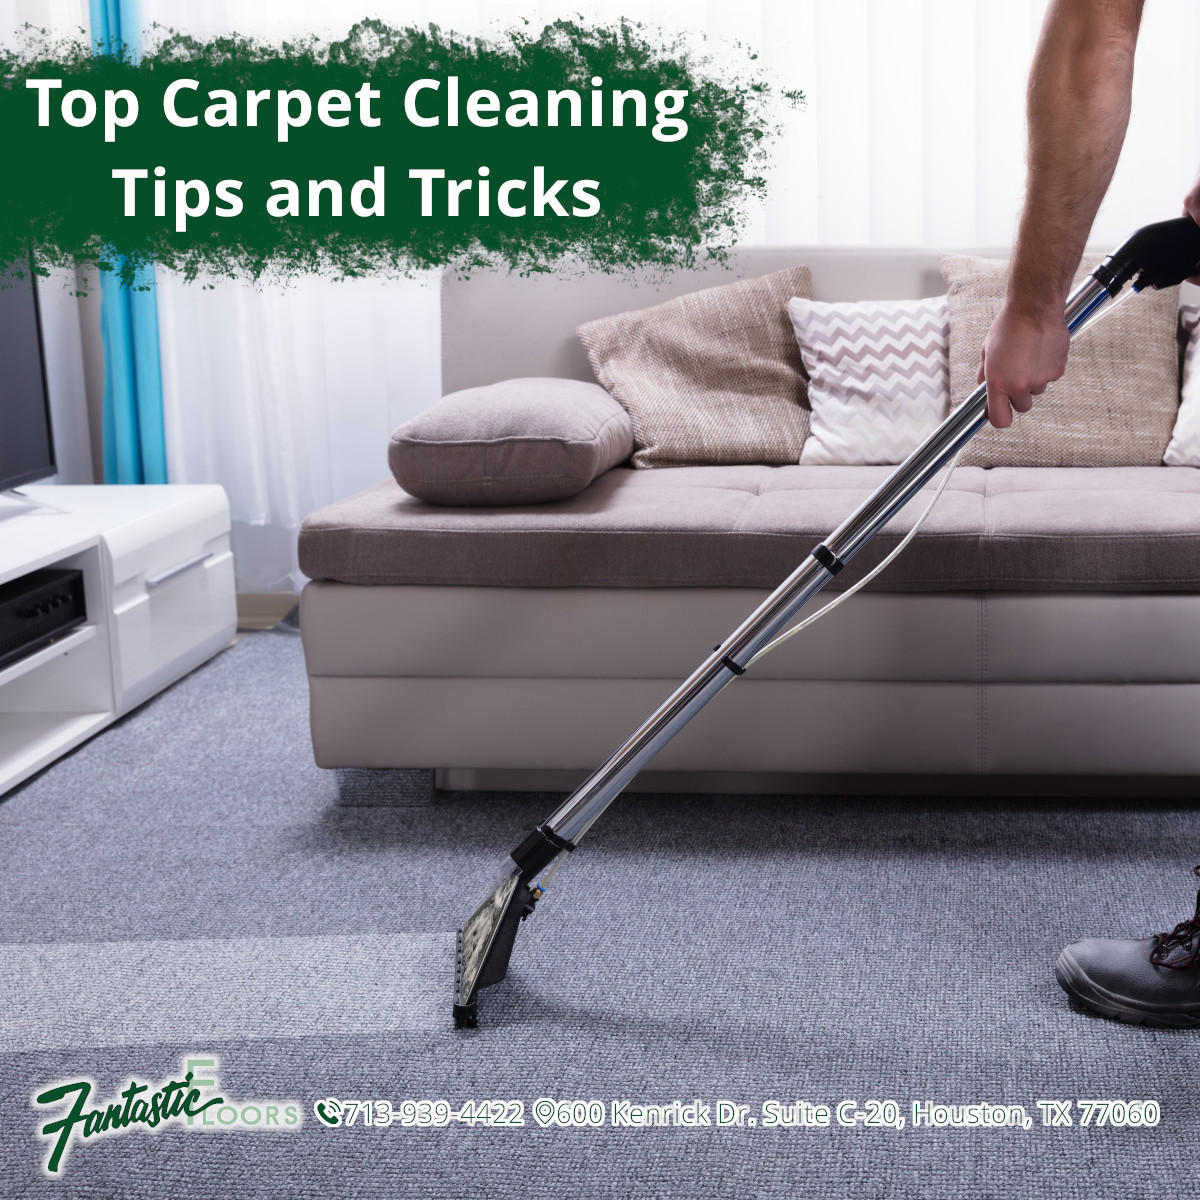 21 Best Carpet Cleaning in Houston